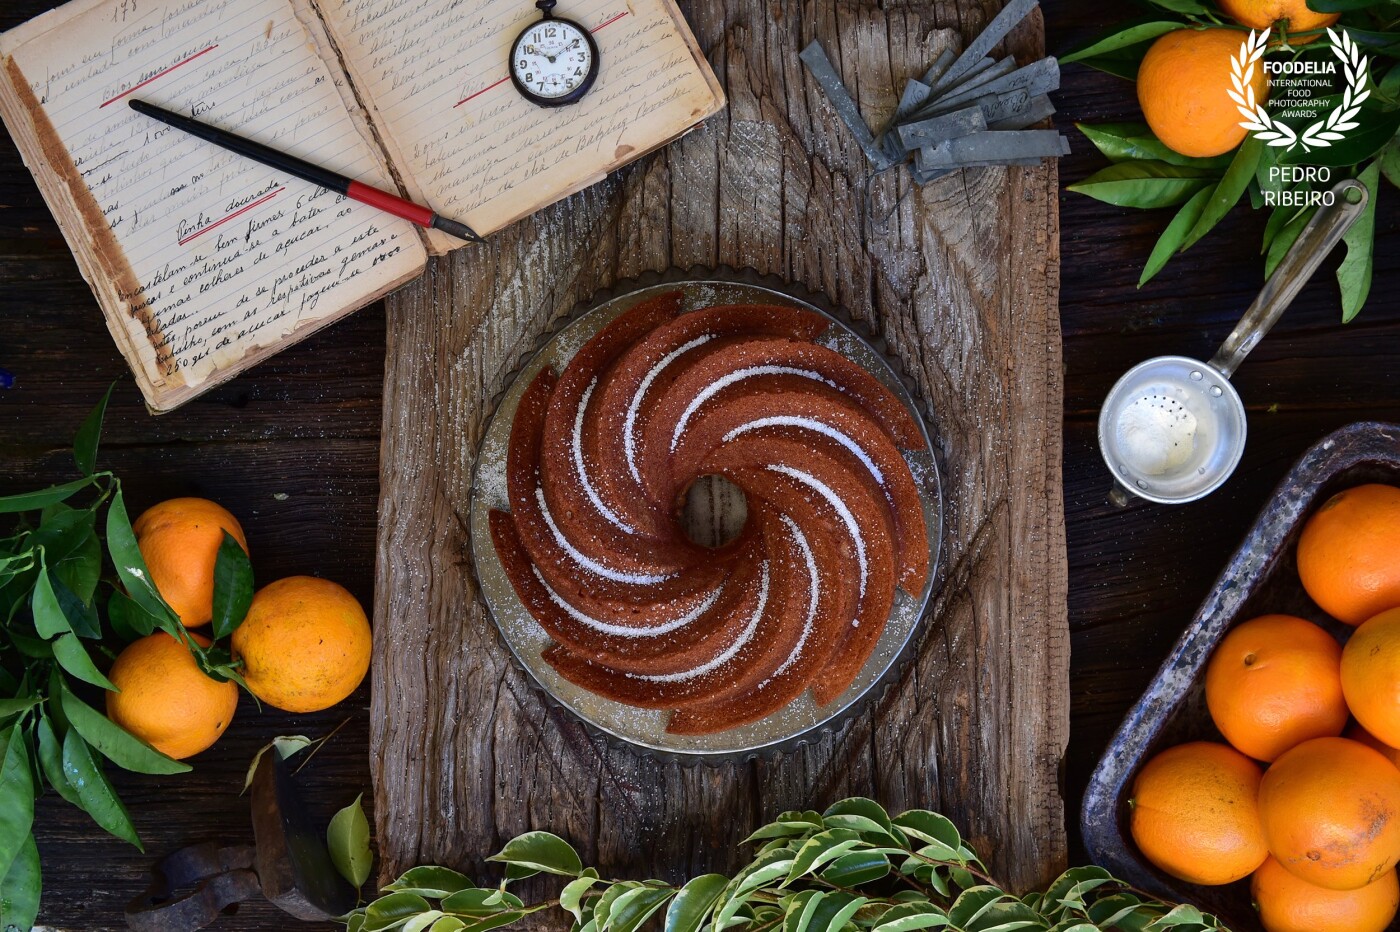 This tradicional Orange cake, was for a promotional photo shooting for a Take Away bakery called "Sal e Limão" located in Porto, Portugal.